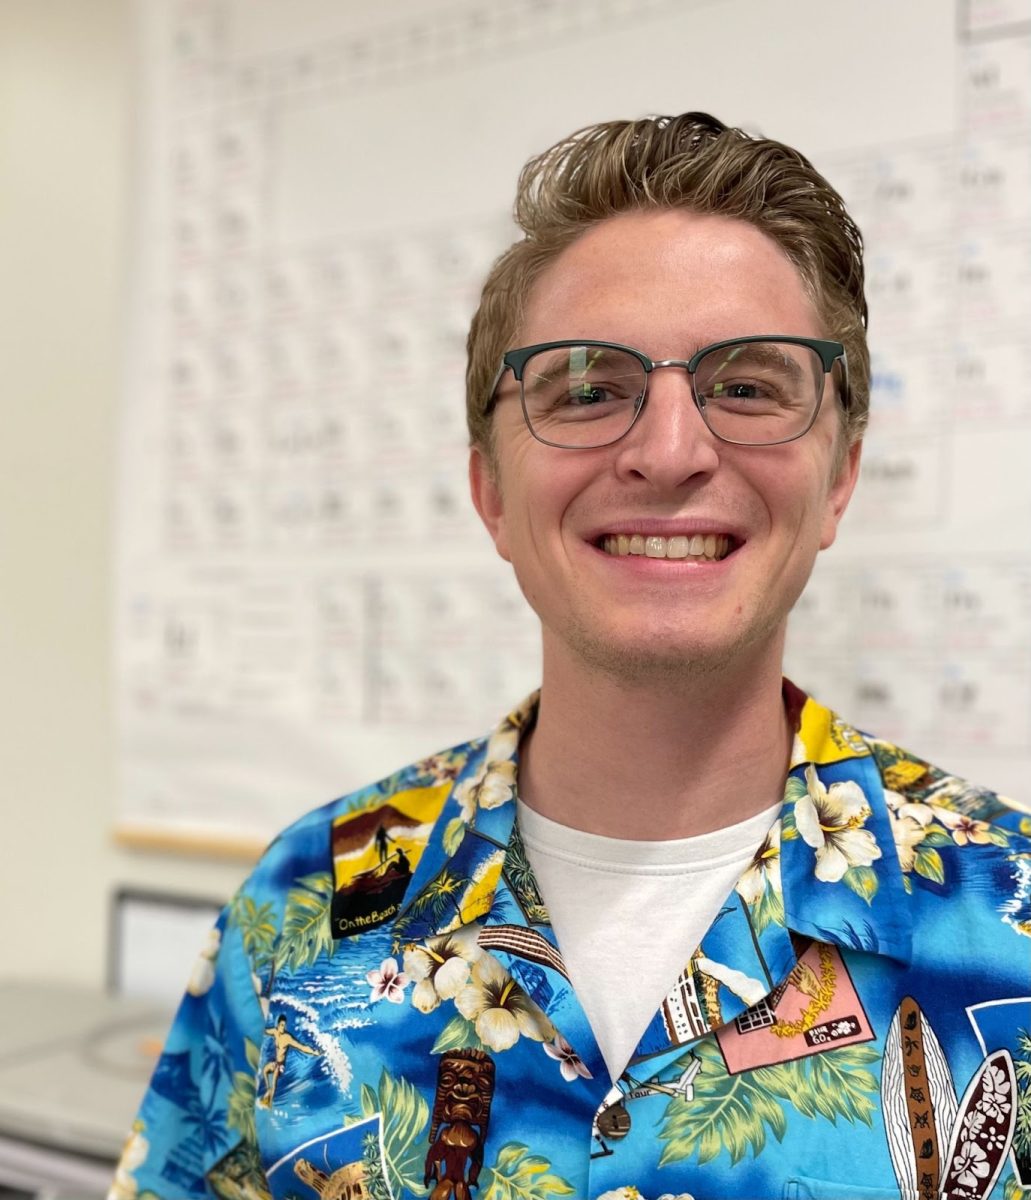 Smiling, Mr. Alex Klussmann shows his school spirit on beach dress-up day. Entering his first year teaching, Mr. Klussmann is excited for all to come in his new journey.